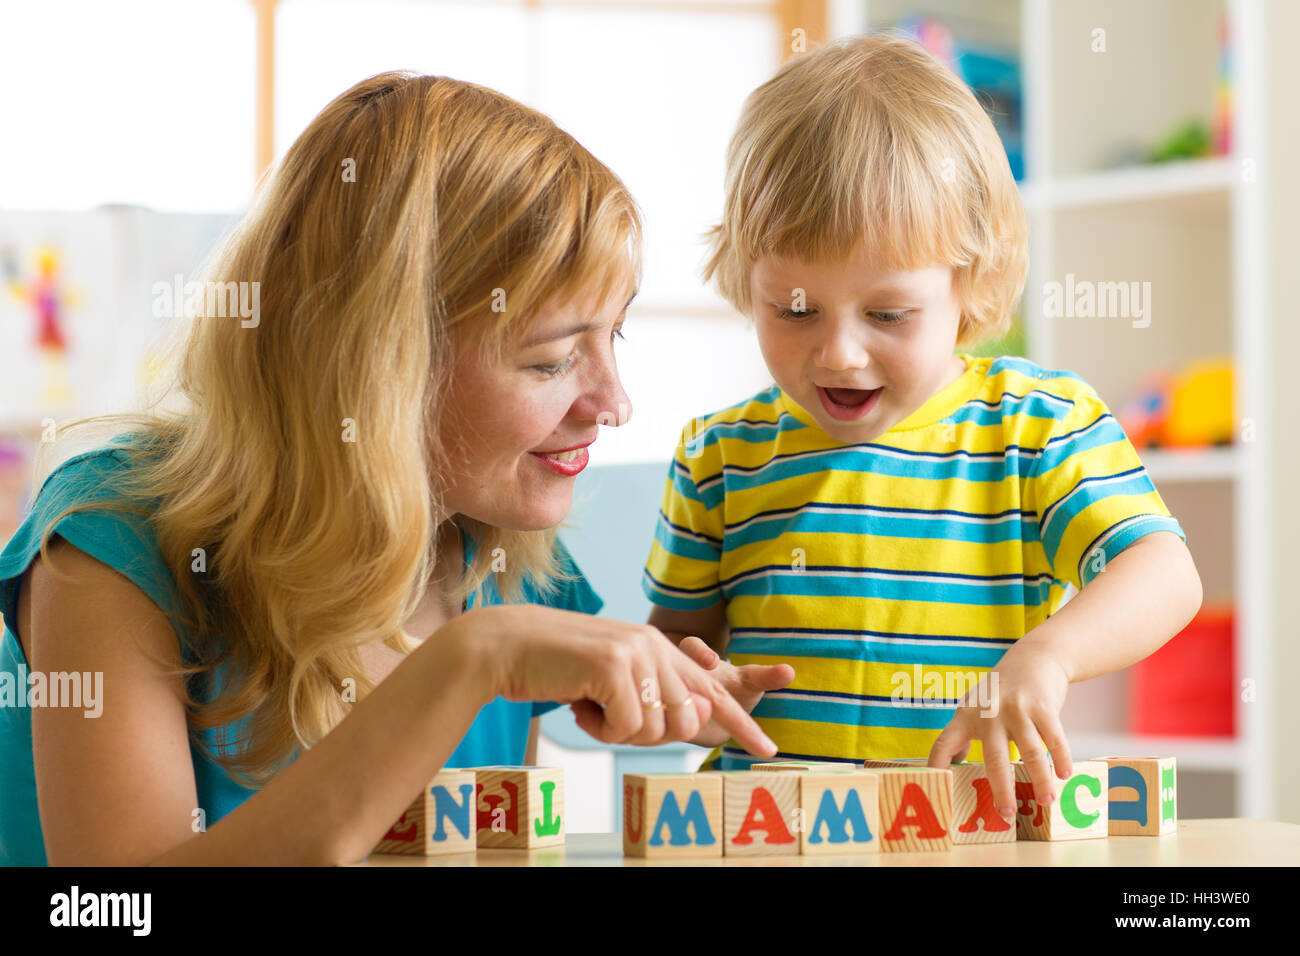 Mother teaches son child letters and words playing with cubes Stock Photo